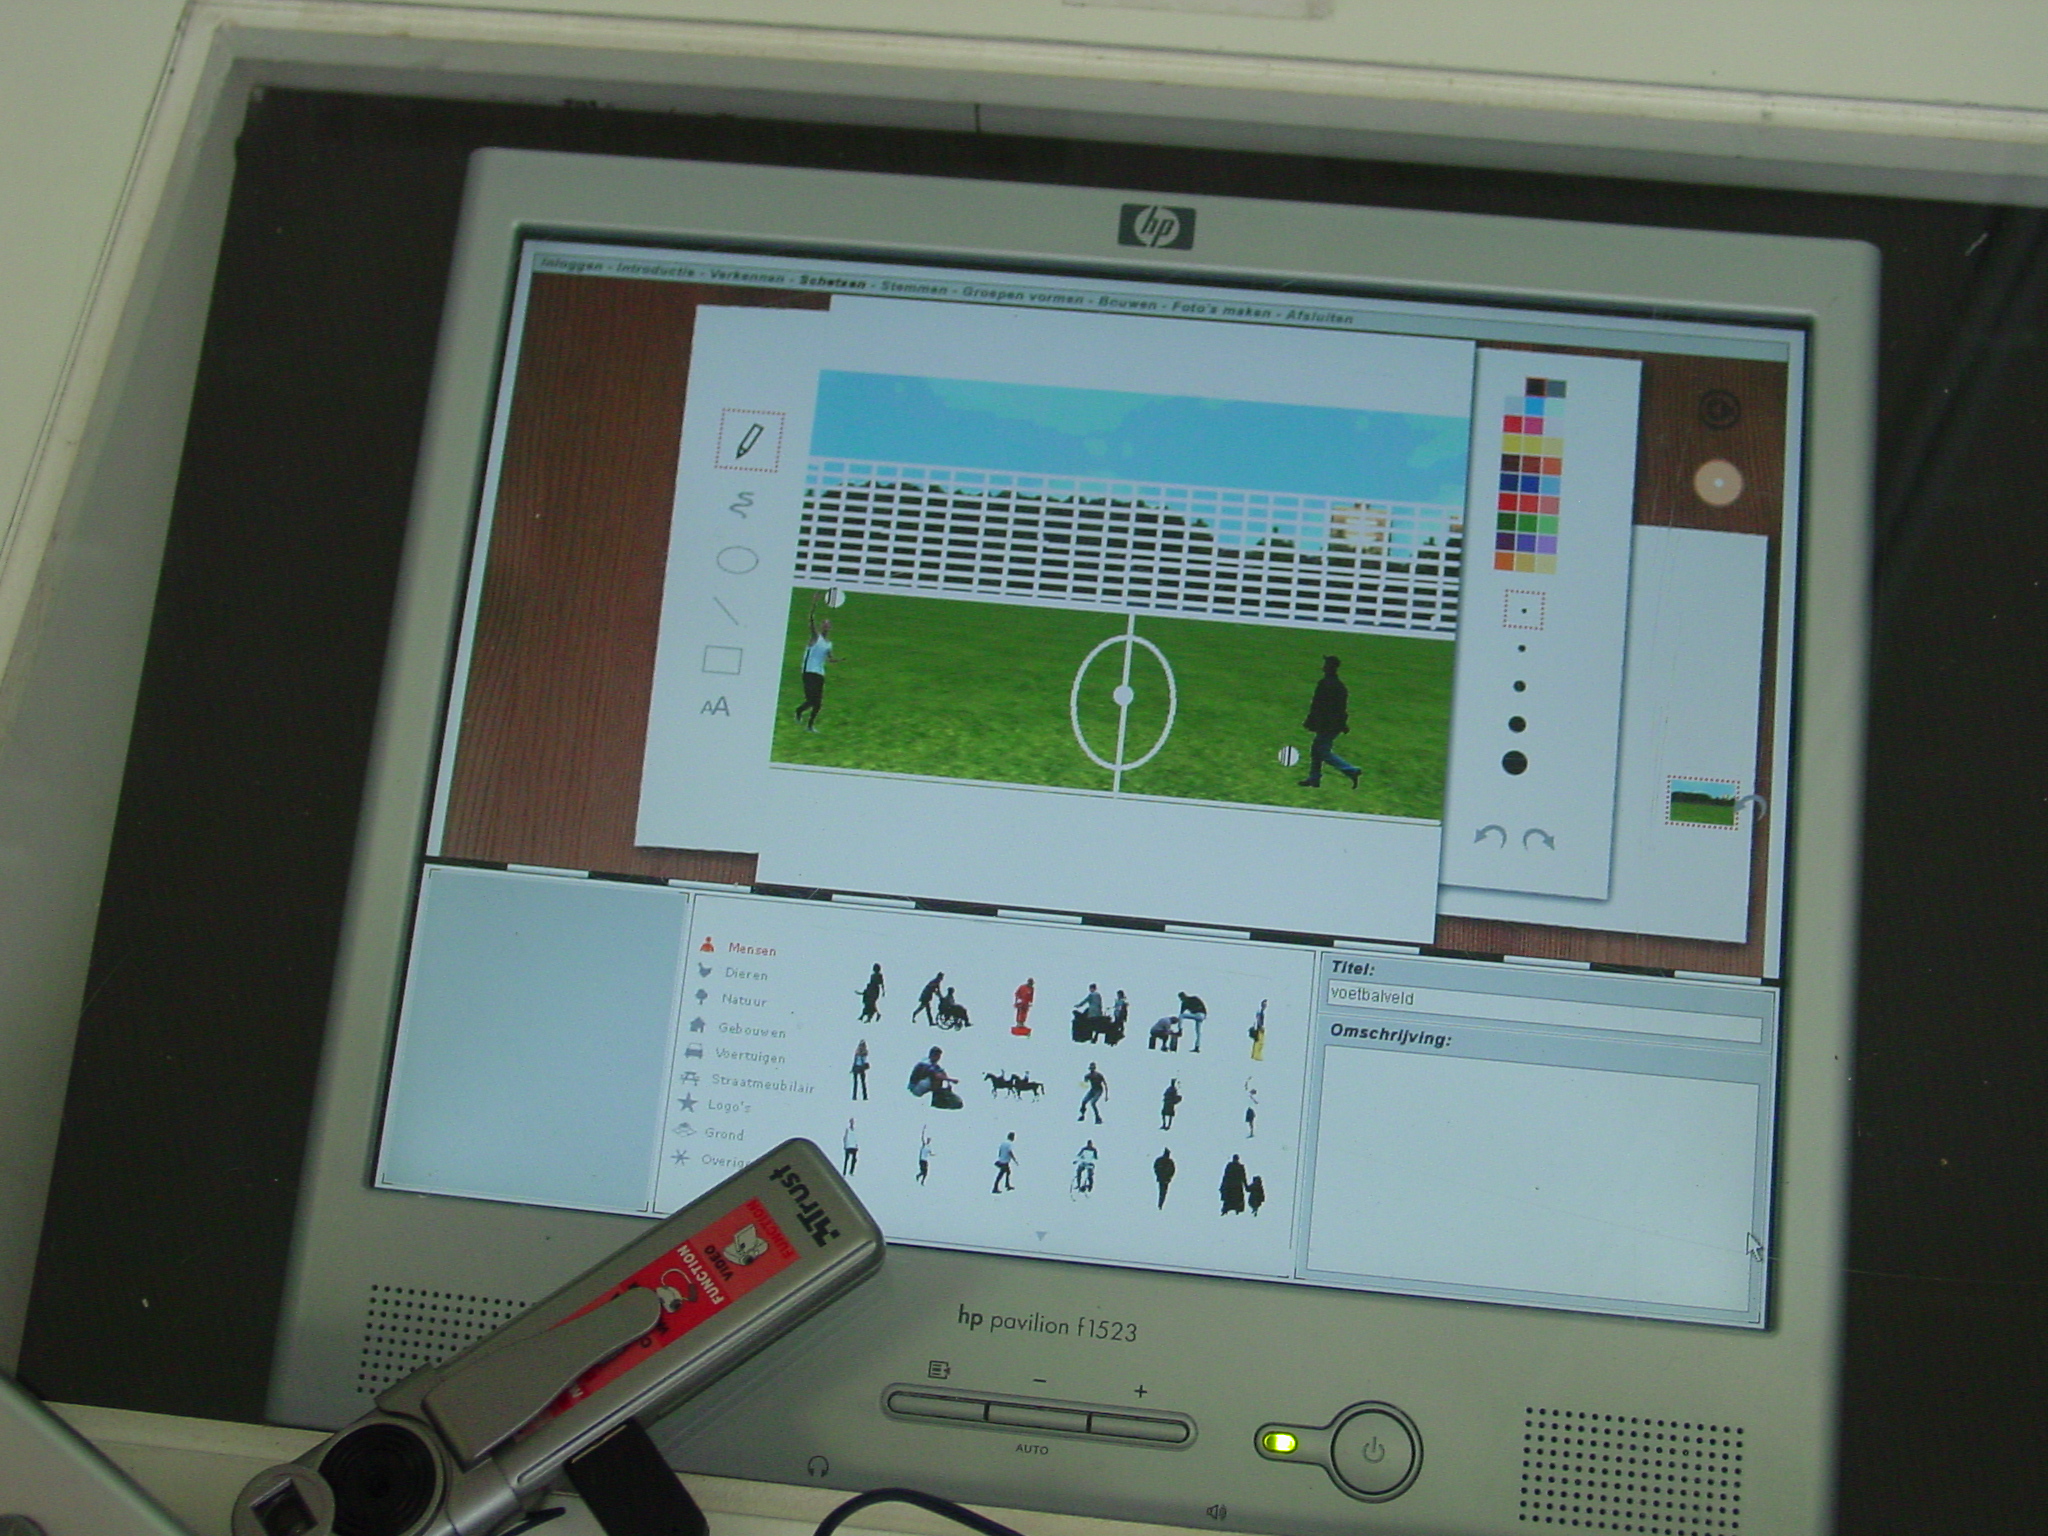 Interactor software in use